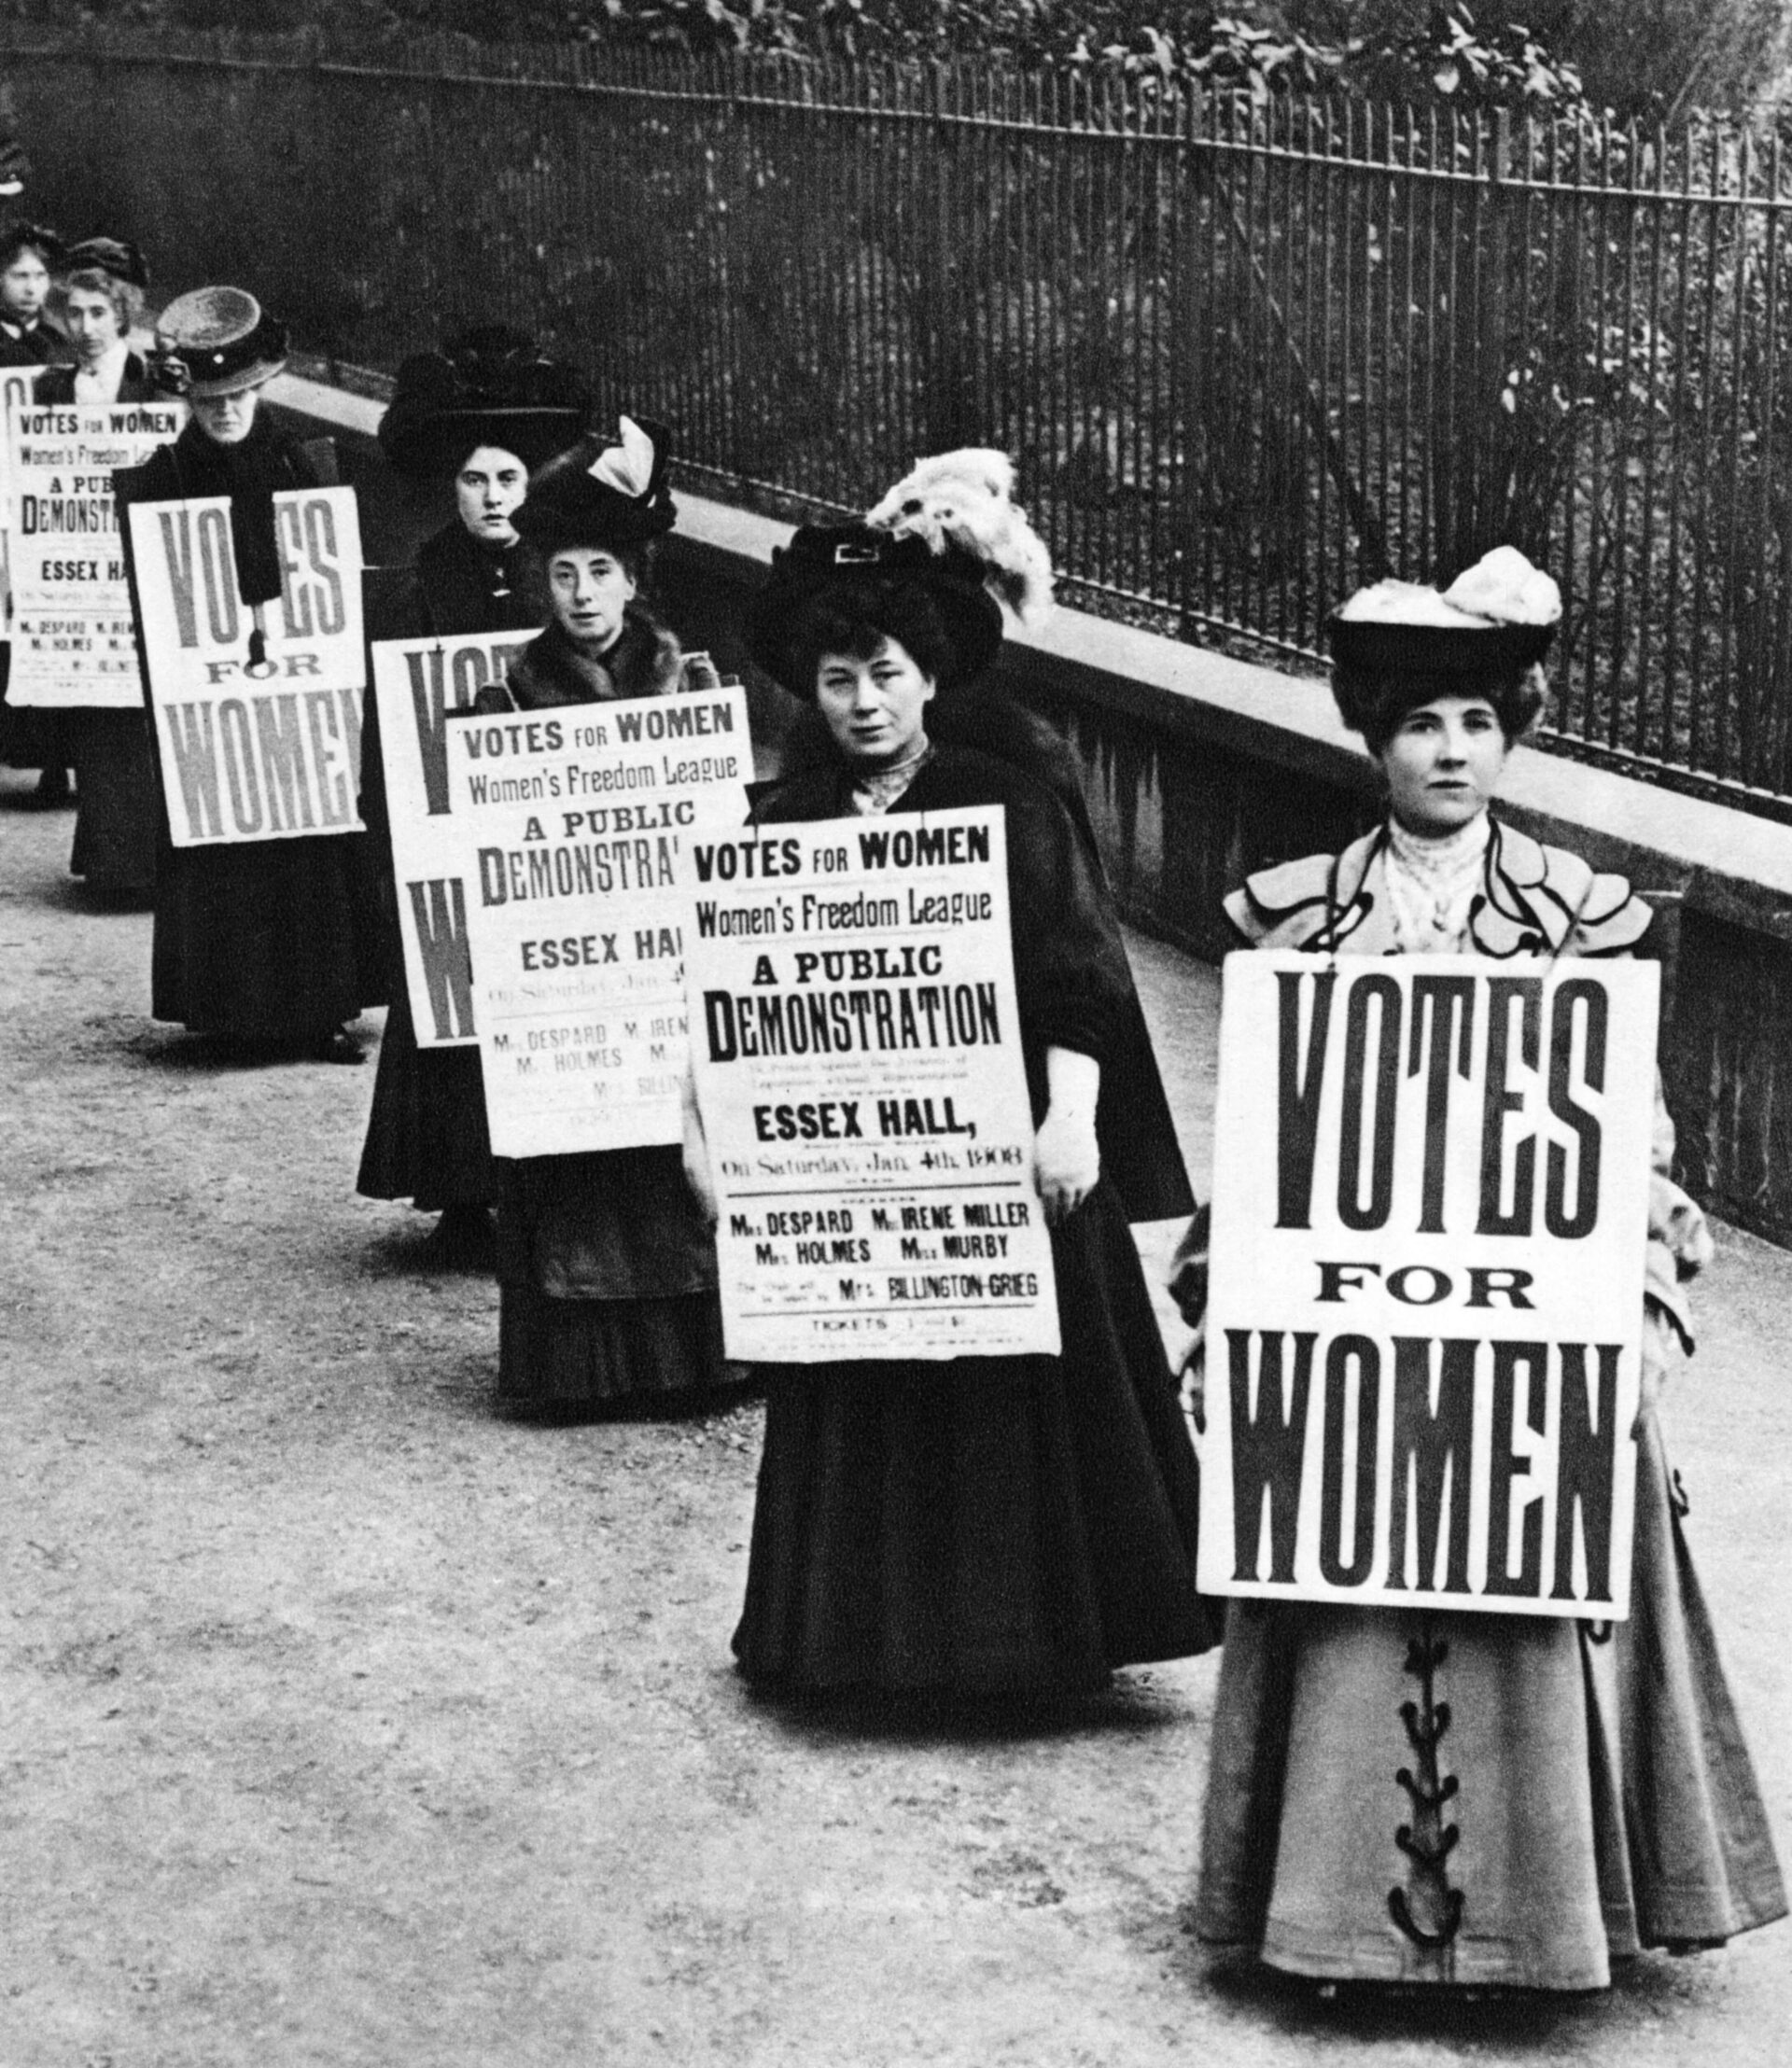 old fashioned vote for women photo